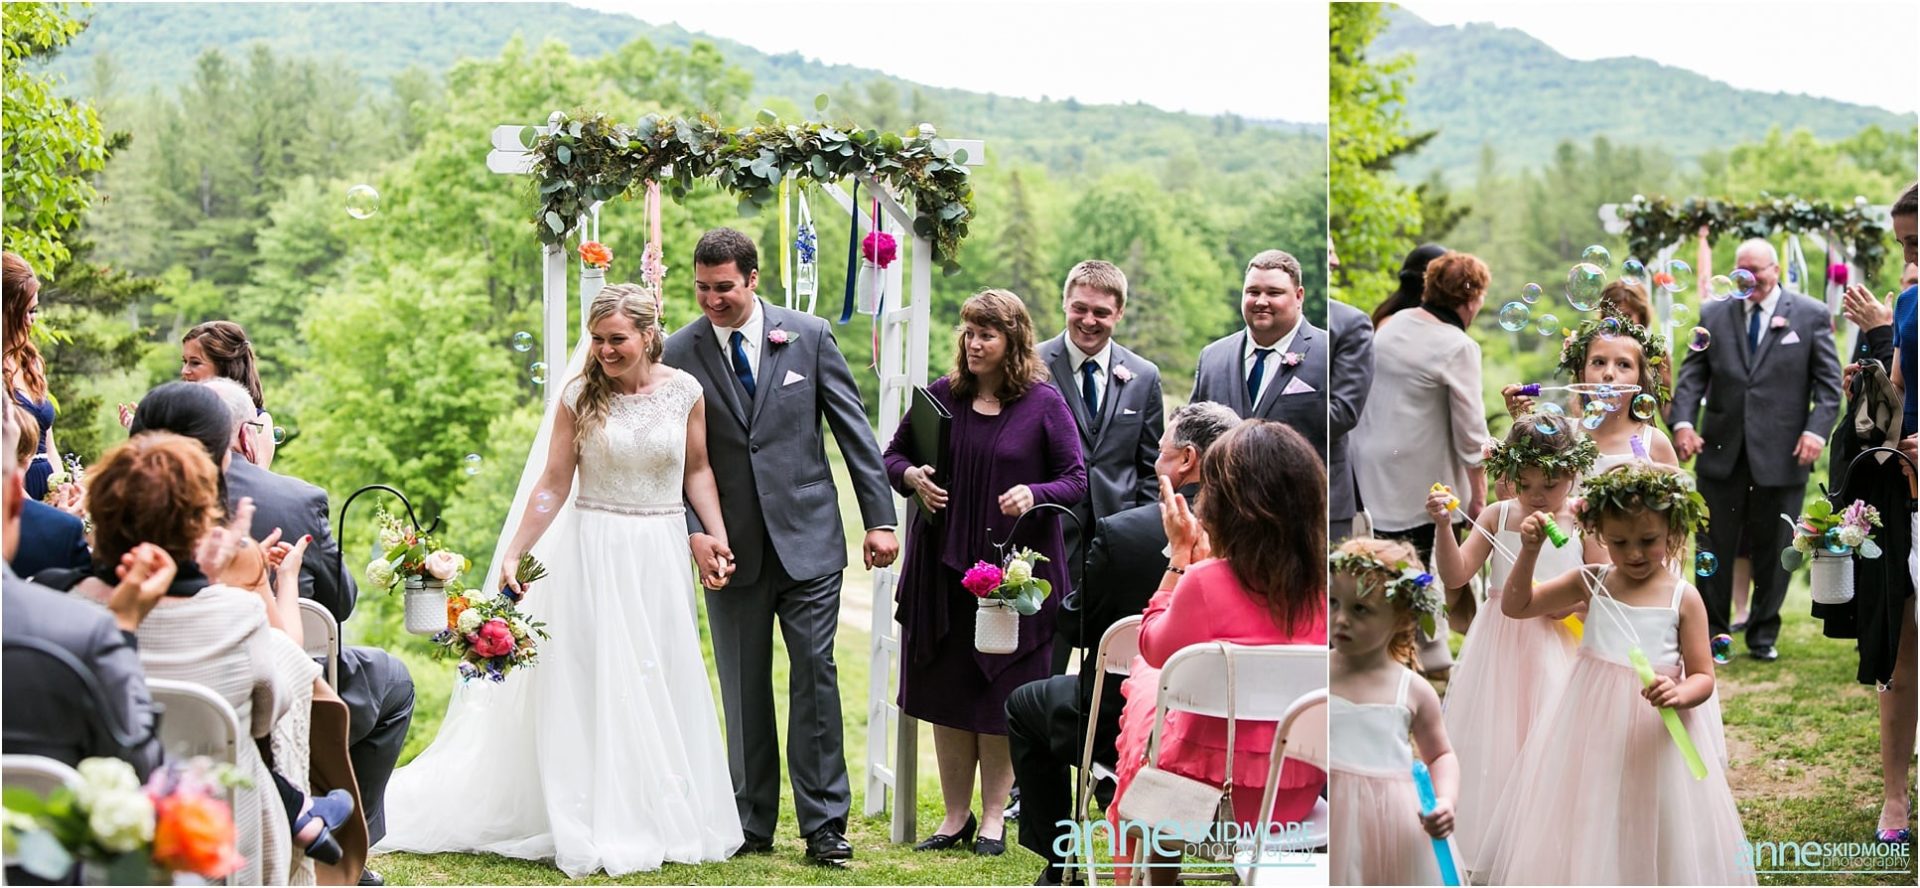 Anne Skidmore Photography - Eagle Mountain House Wedding: Aly & Randy